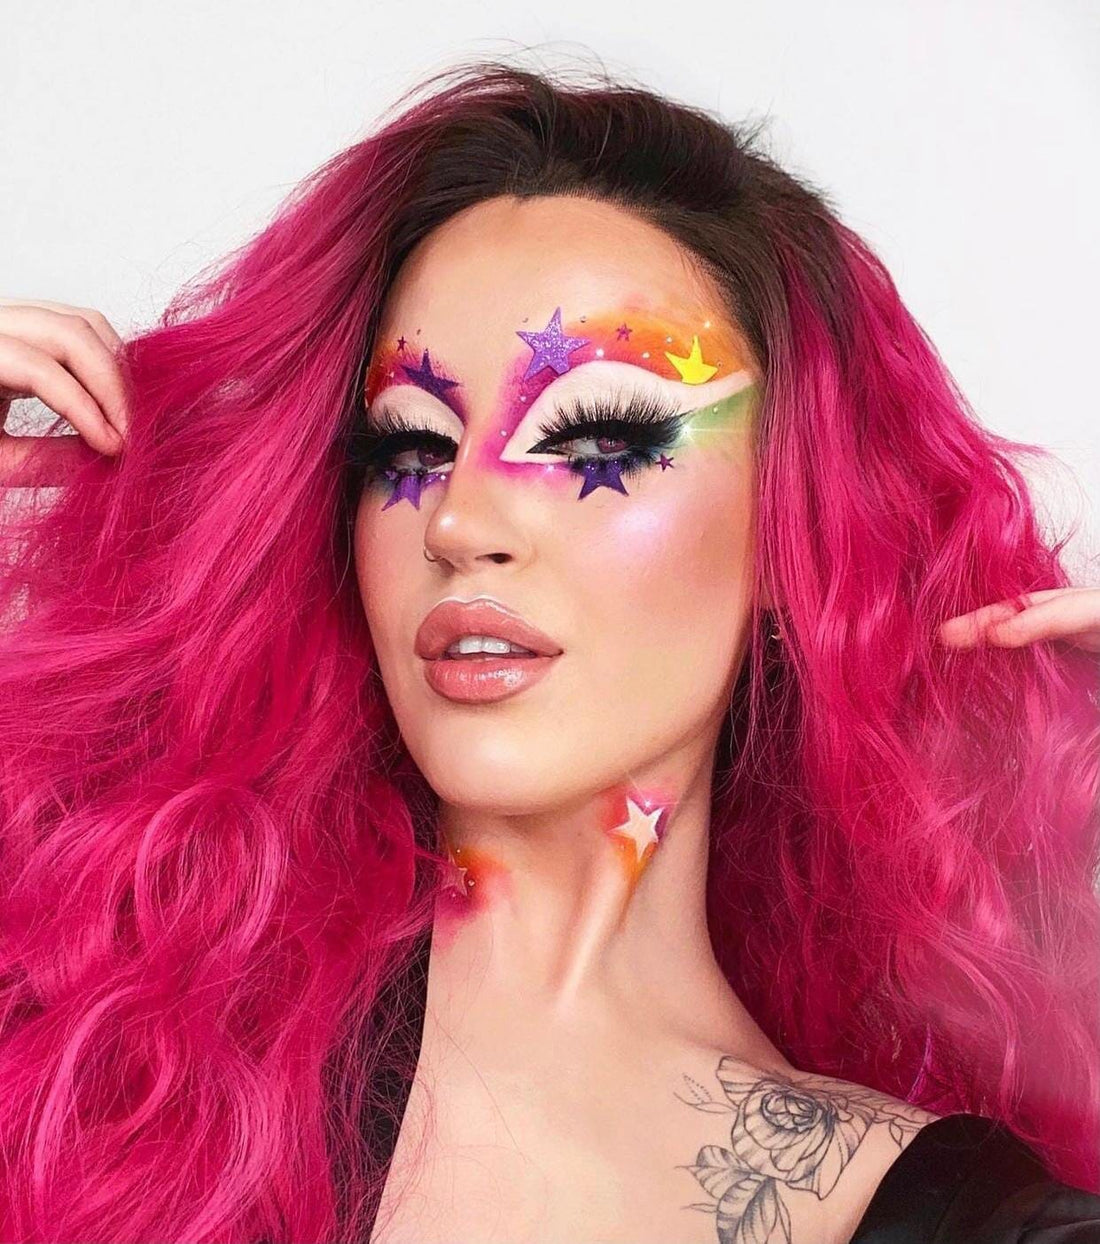 Kash Beauty to celebrate Pride Month with LGBTQ+ charity fundraiser - KASH Beauty